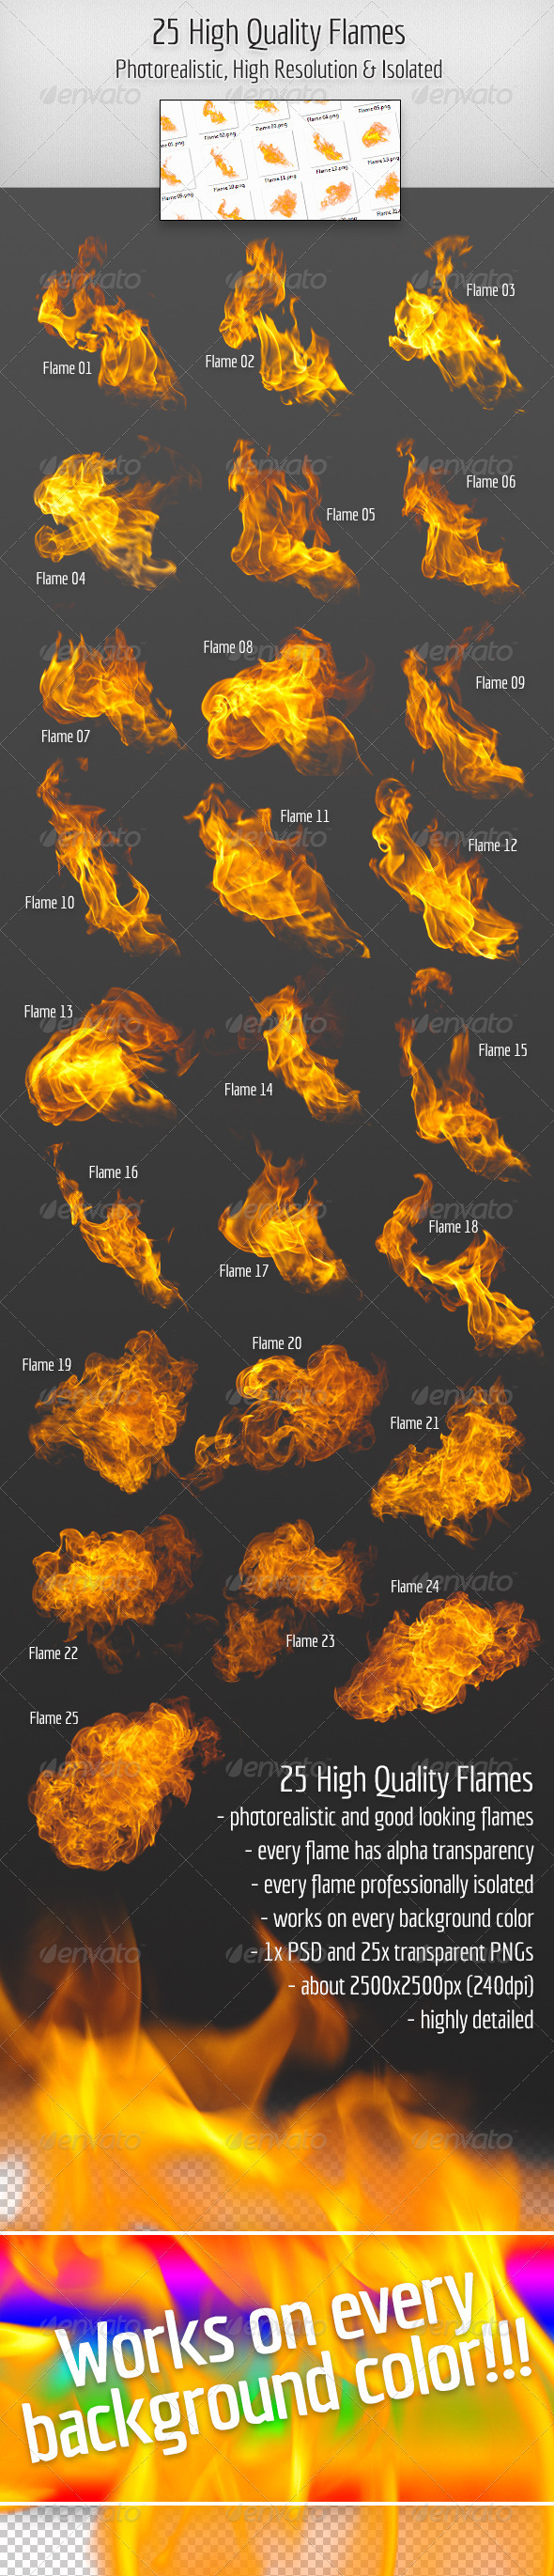 Graphics: Alpha Background Blaze Brush Burn Candle Cloud Cloud Computing Effects Fire Flame Flames Fx Heat Hot Isolated Light Natural Nature Orange Photorealistic Png Real Realistic Red Smoke Transparency Transparent Warm Wild